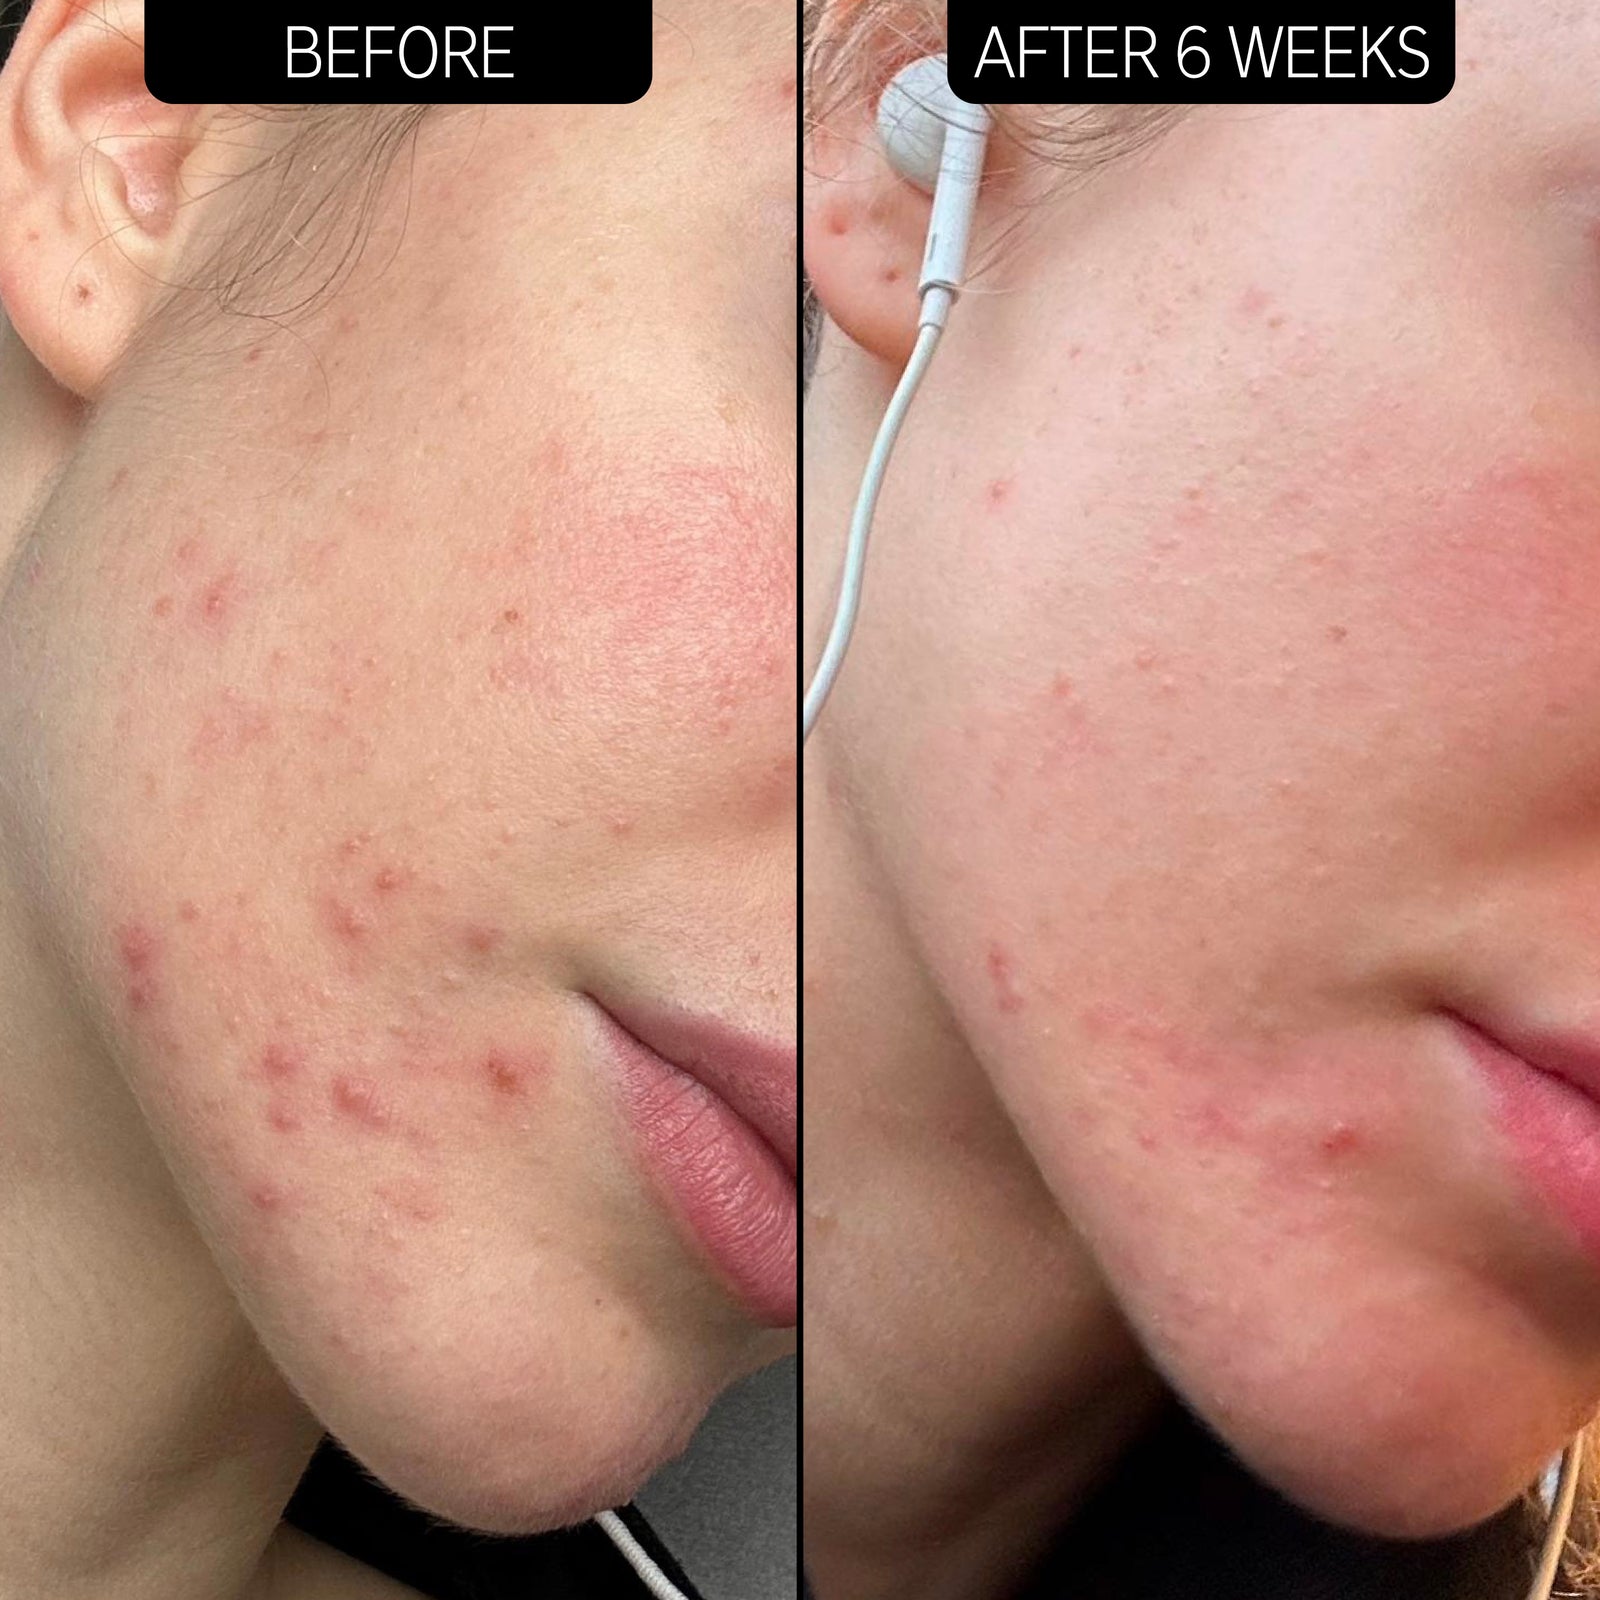 Before and after 6 week results displaying significant blemish reduction 